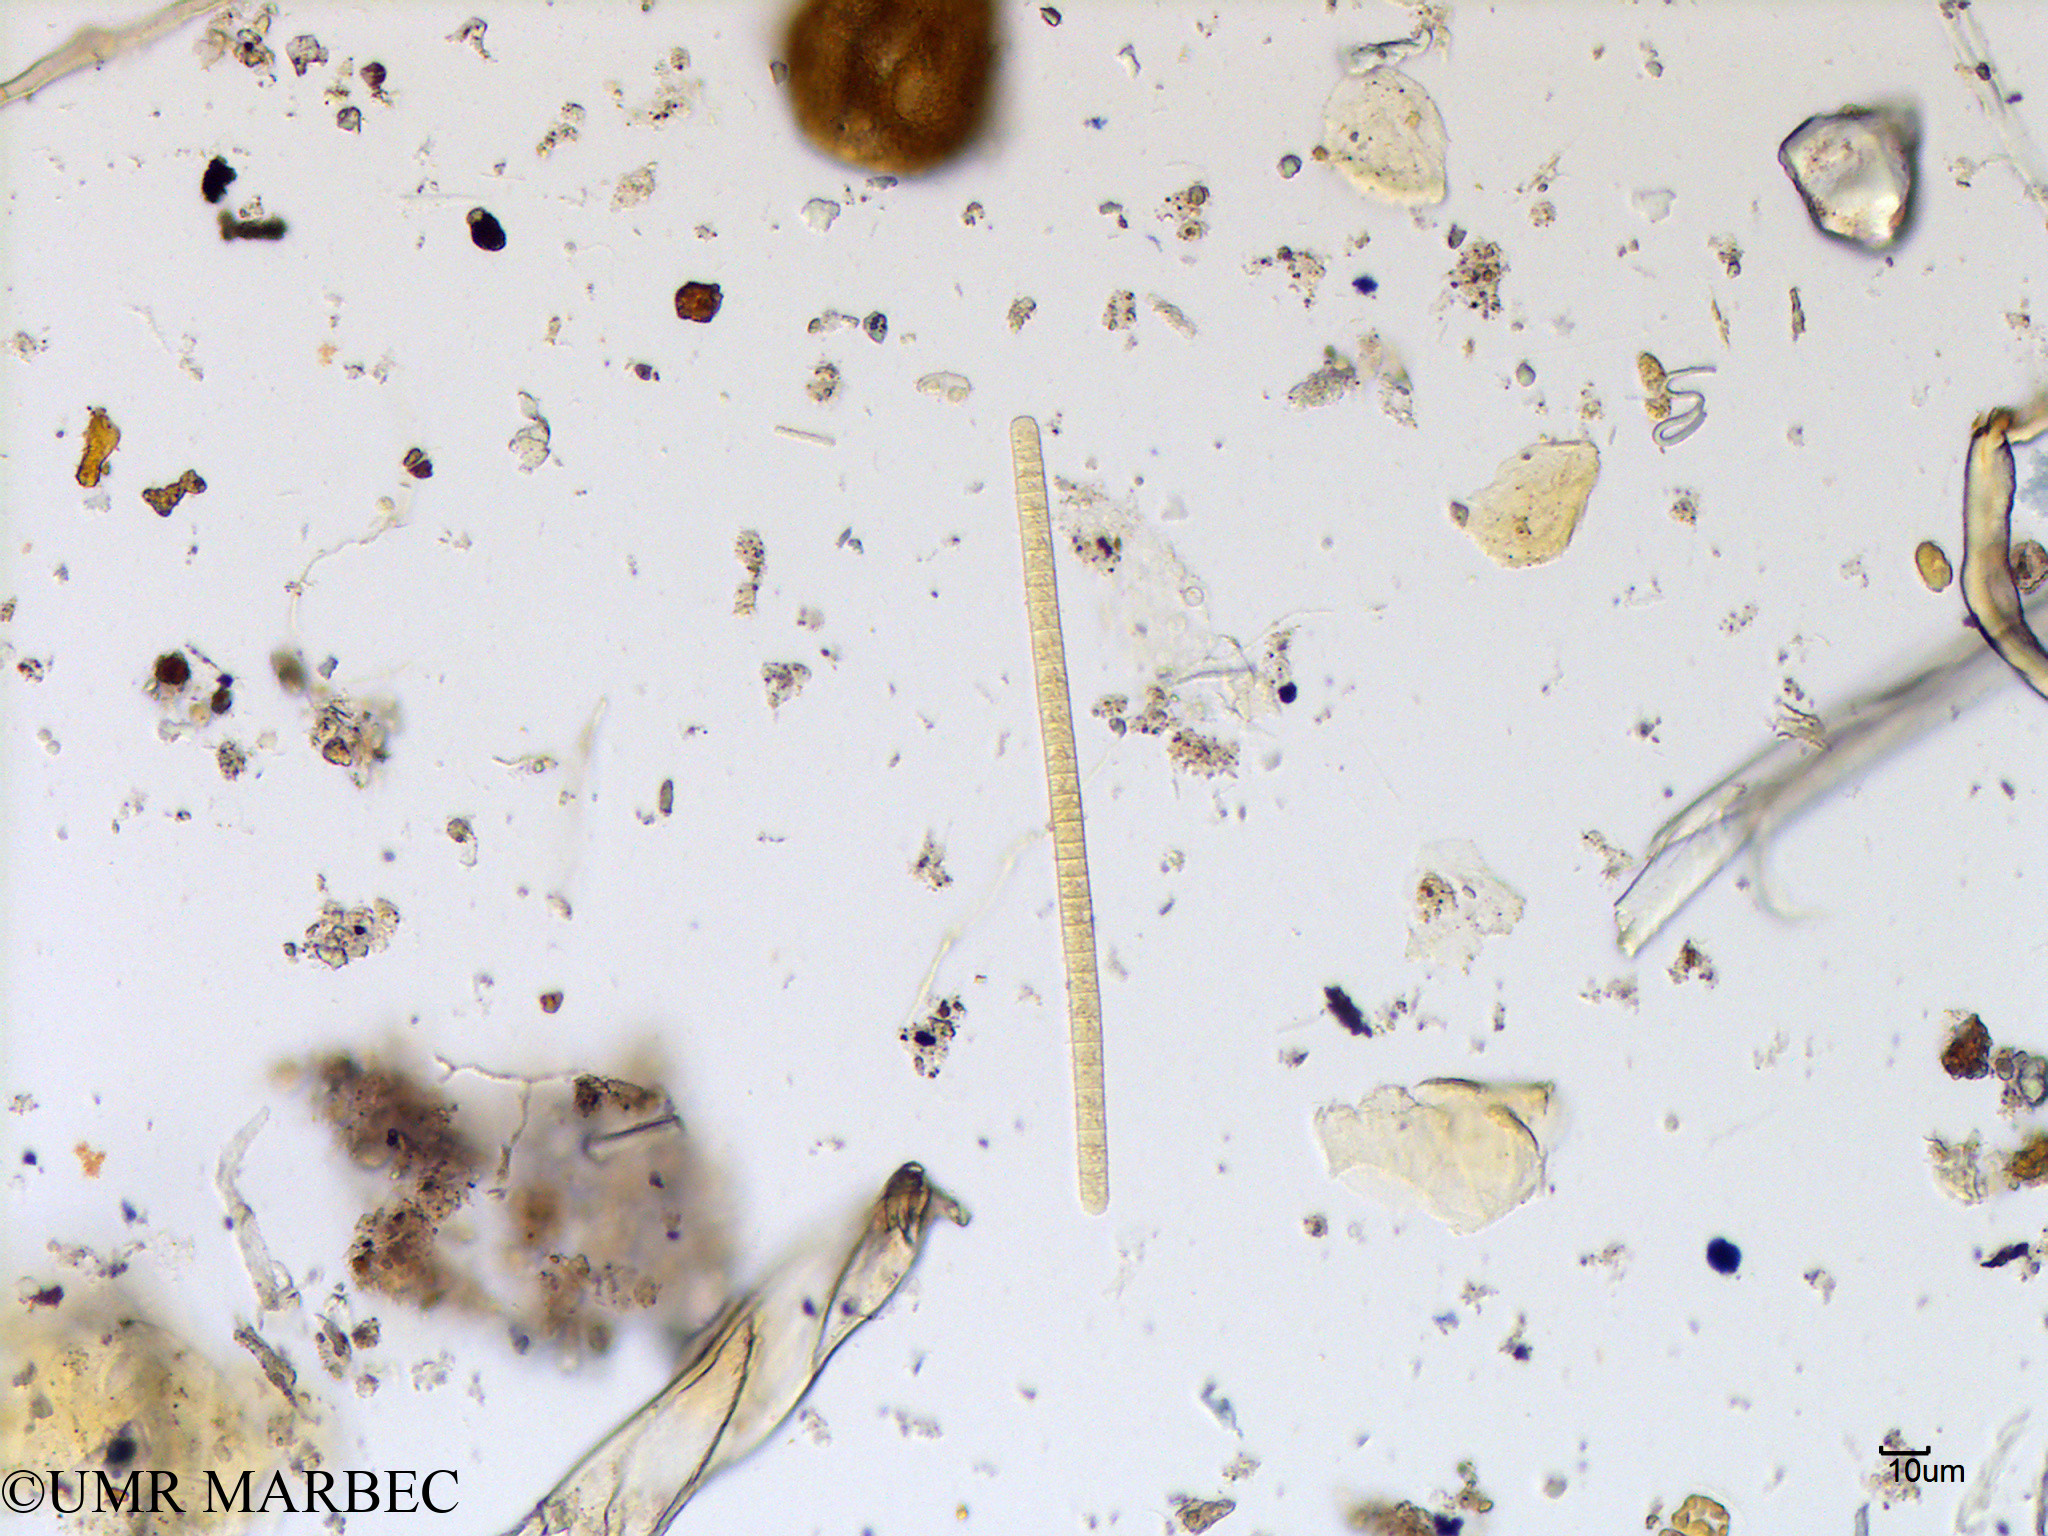 phyto/Scattered_Islands/mayotte_lagoon/SIREME May 2016/Trichodesmium sp4 (MAY2_trichodesmium).tif(copy).jpg